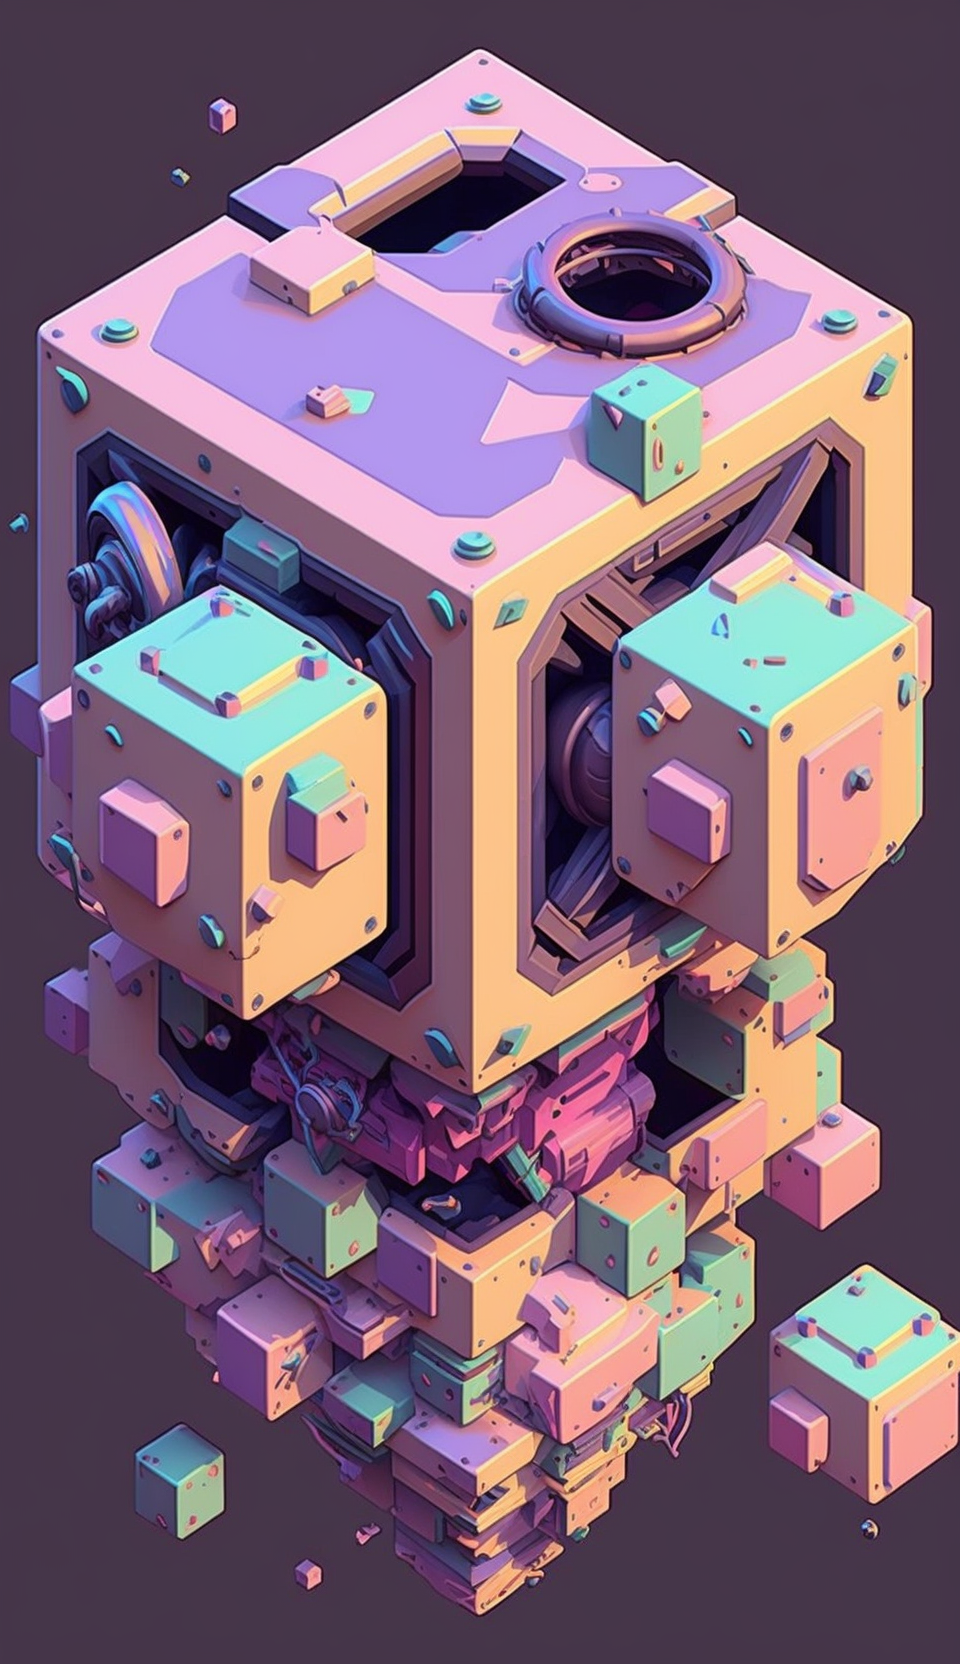 soupcan13_floating_hyper_detailed_mechanical_cubes_mecha_anime__84153958-bb93-4058-8894-f077b161abe1.png